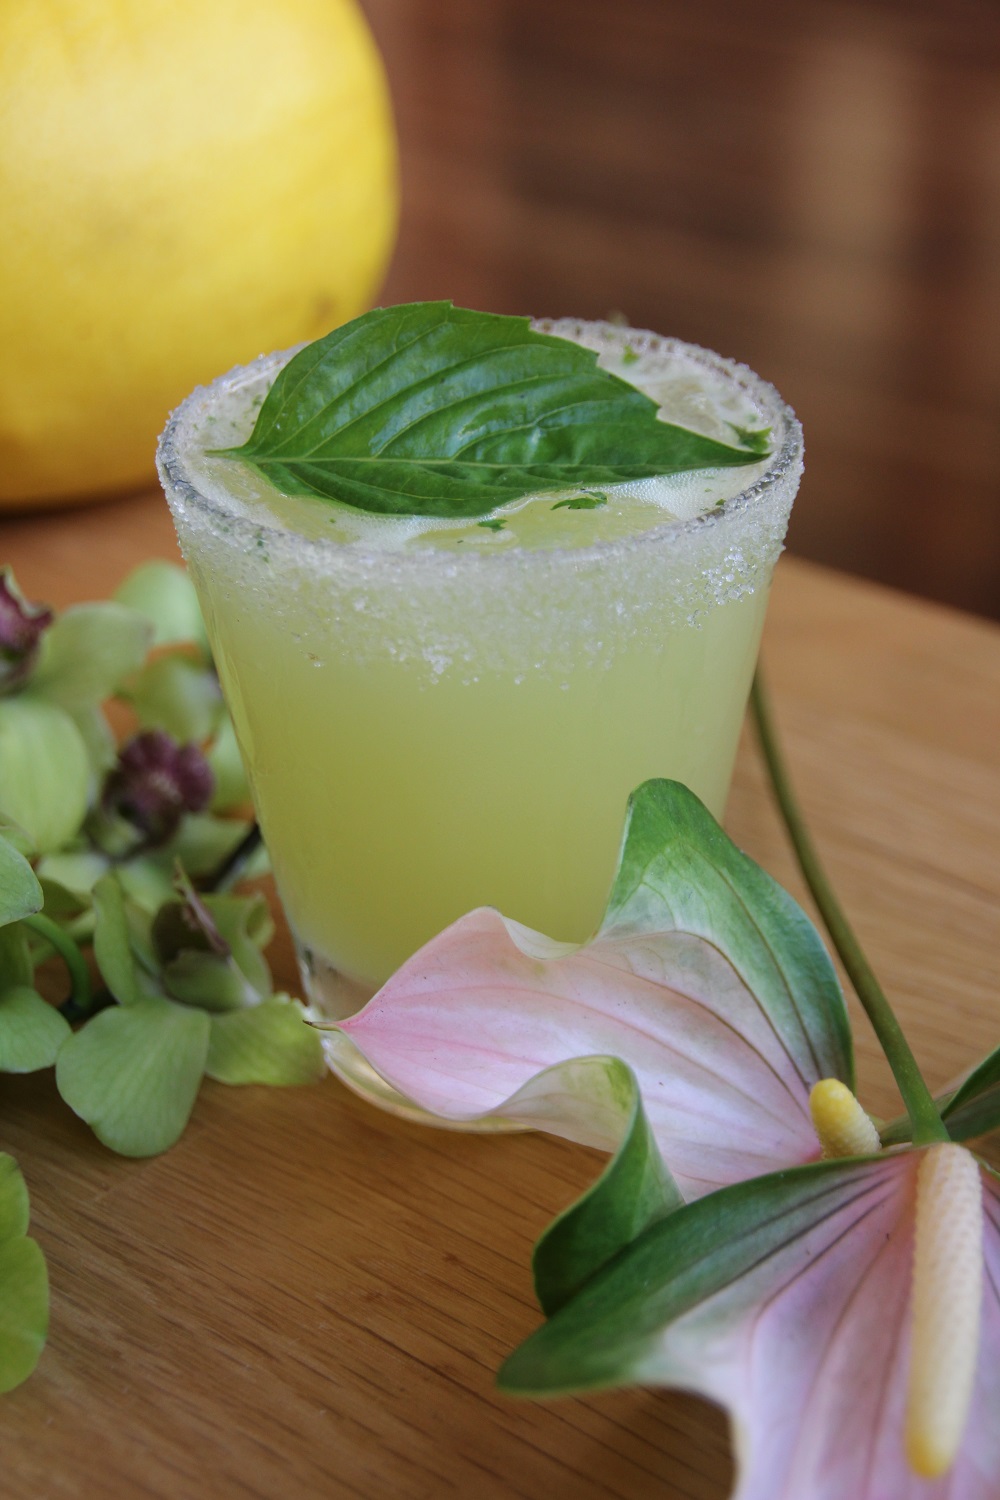 Cocktail with leafy garnish